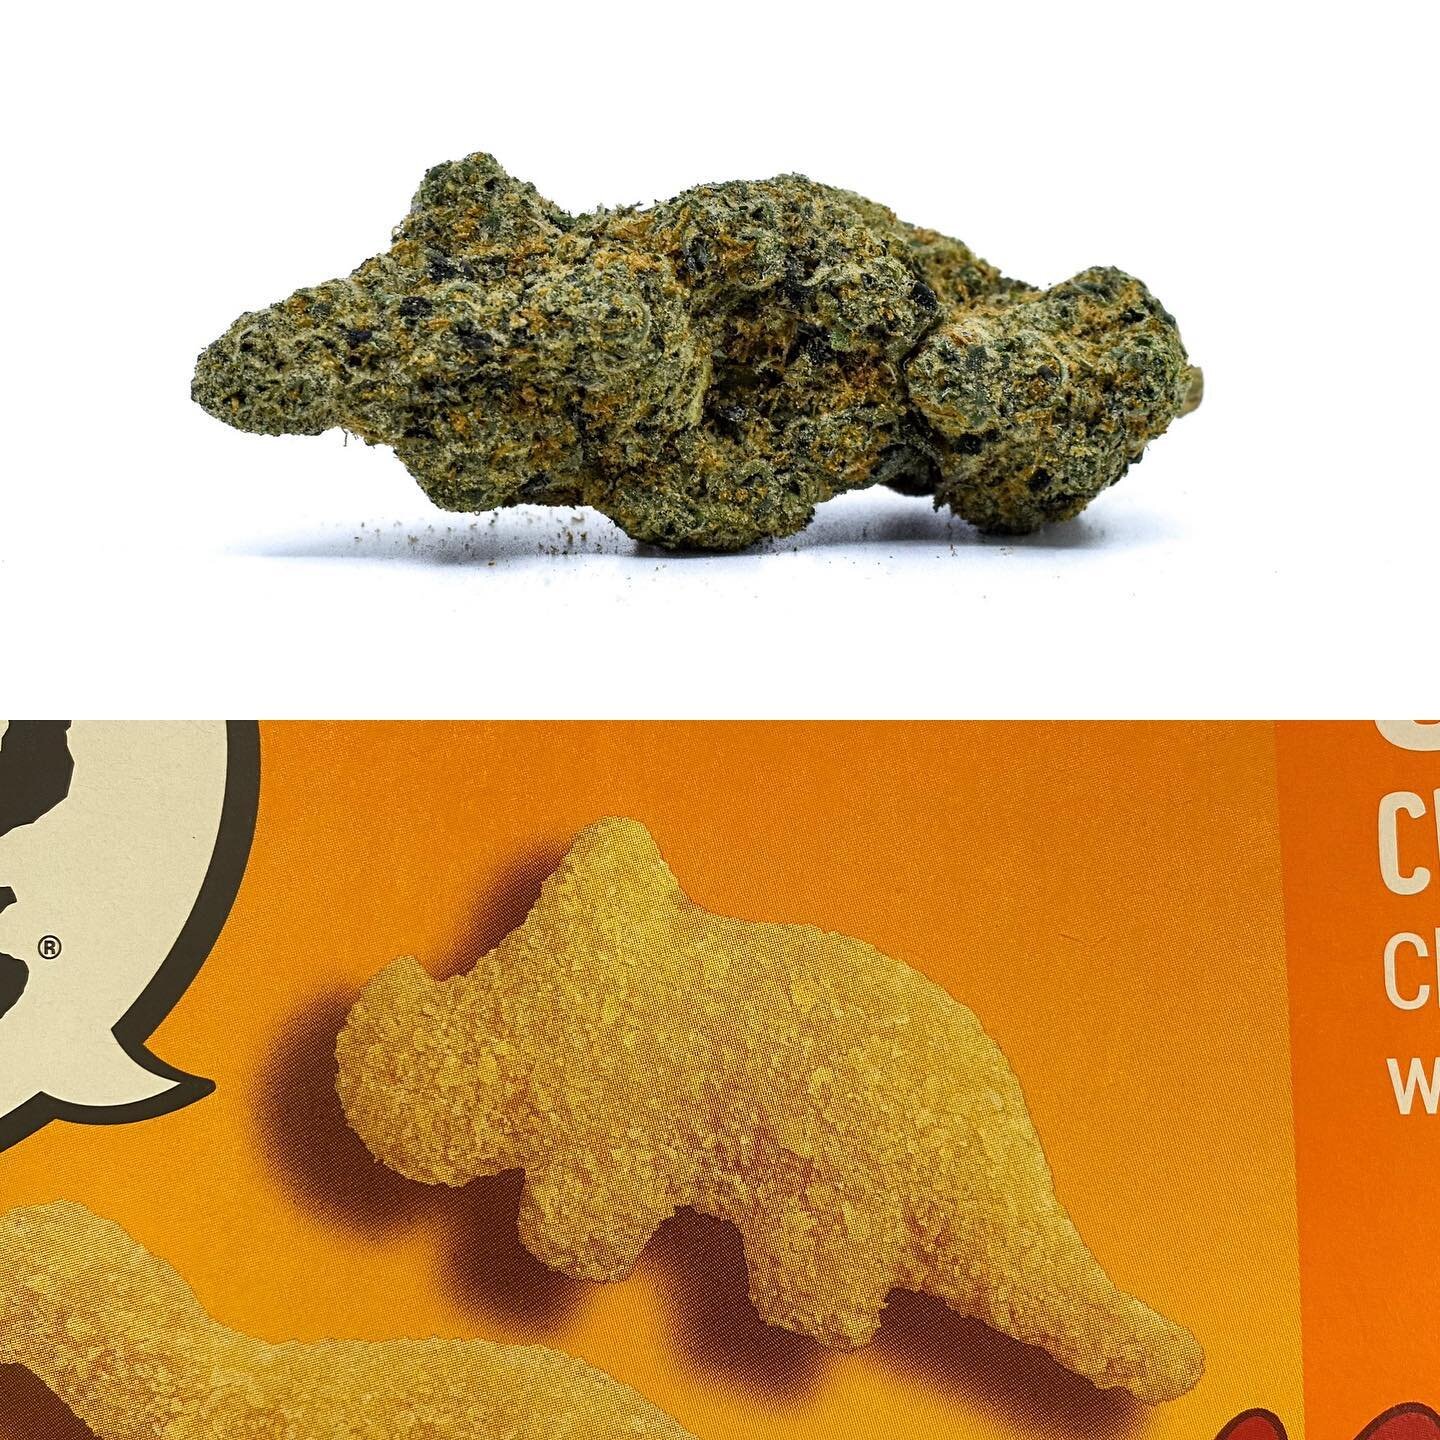 Nugs vs Dino Nugs. Which are you reaching for this weekend? (no sales via instagram)